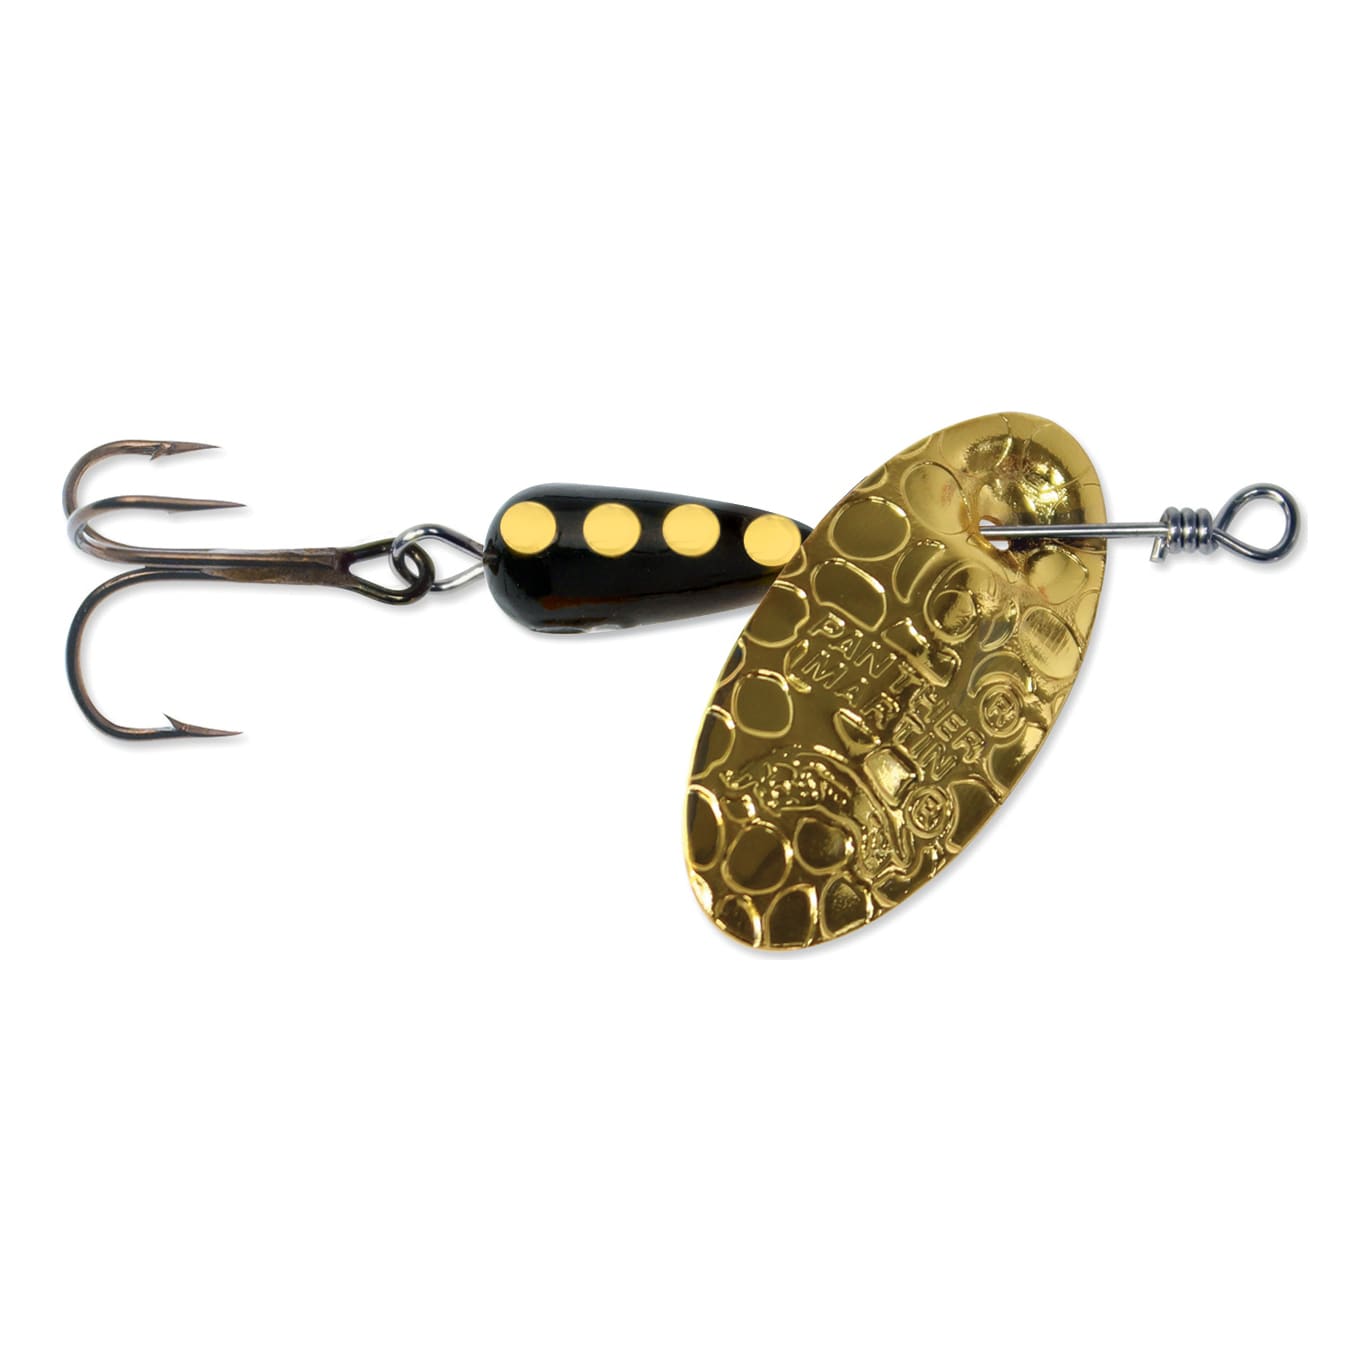 Panther Martin Trout Spinners - Cabelas - PANTHER MARTIN - InLine